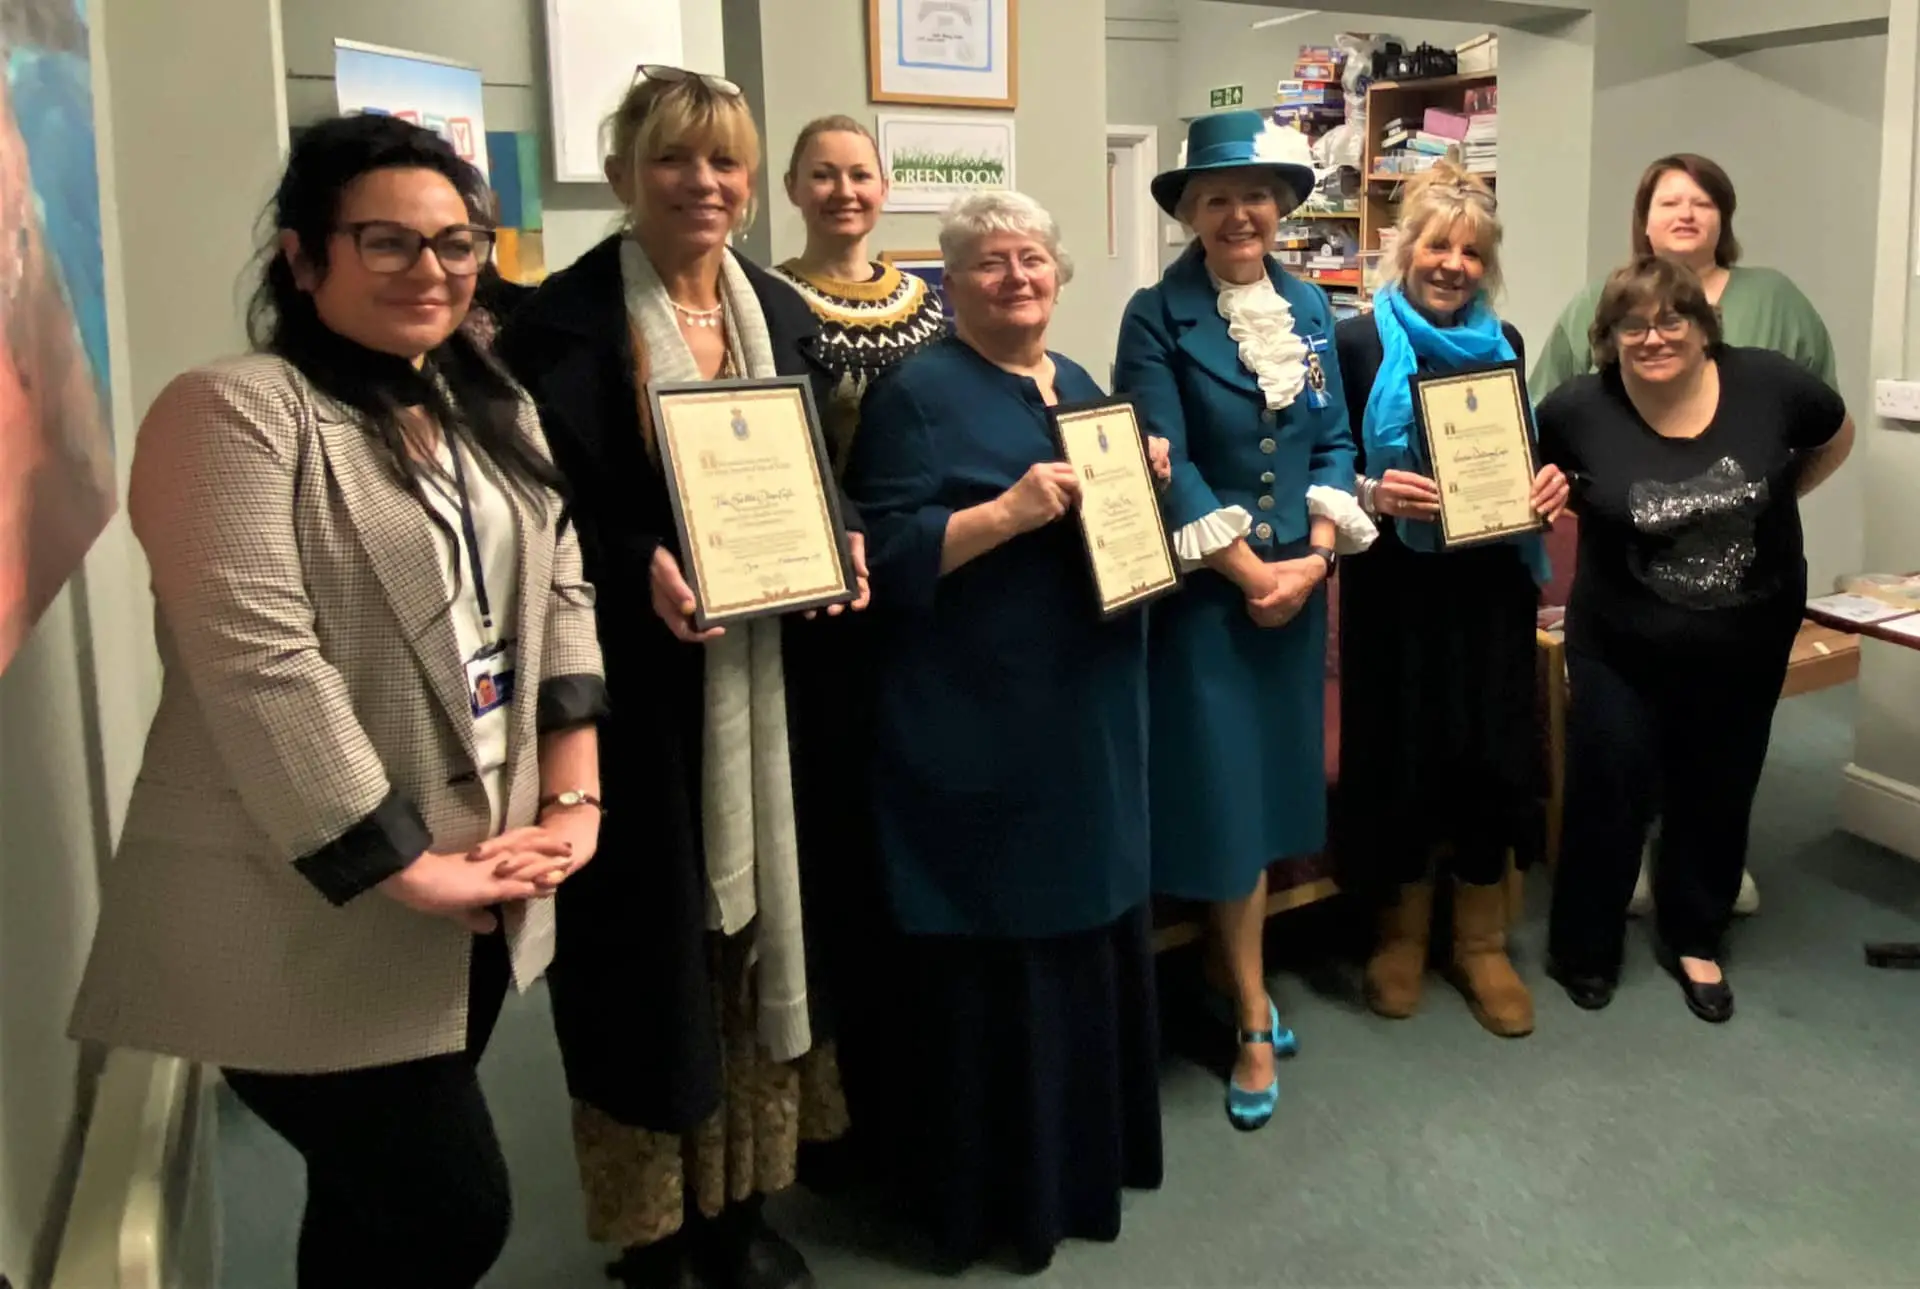 High Sheriff Awards at Ventnor Town Council